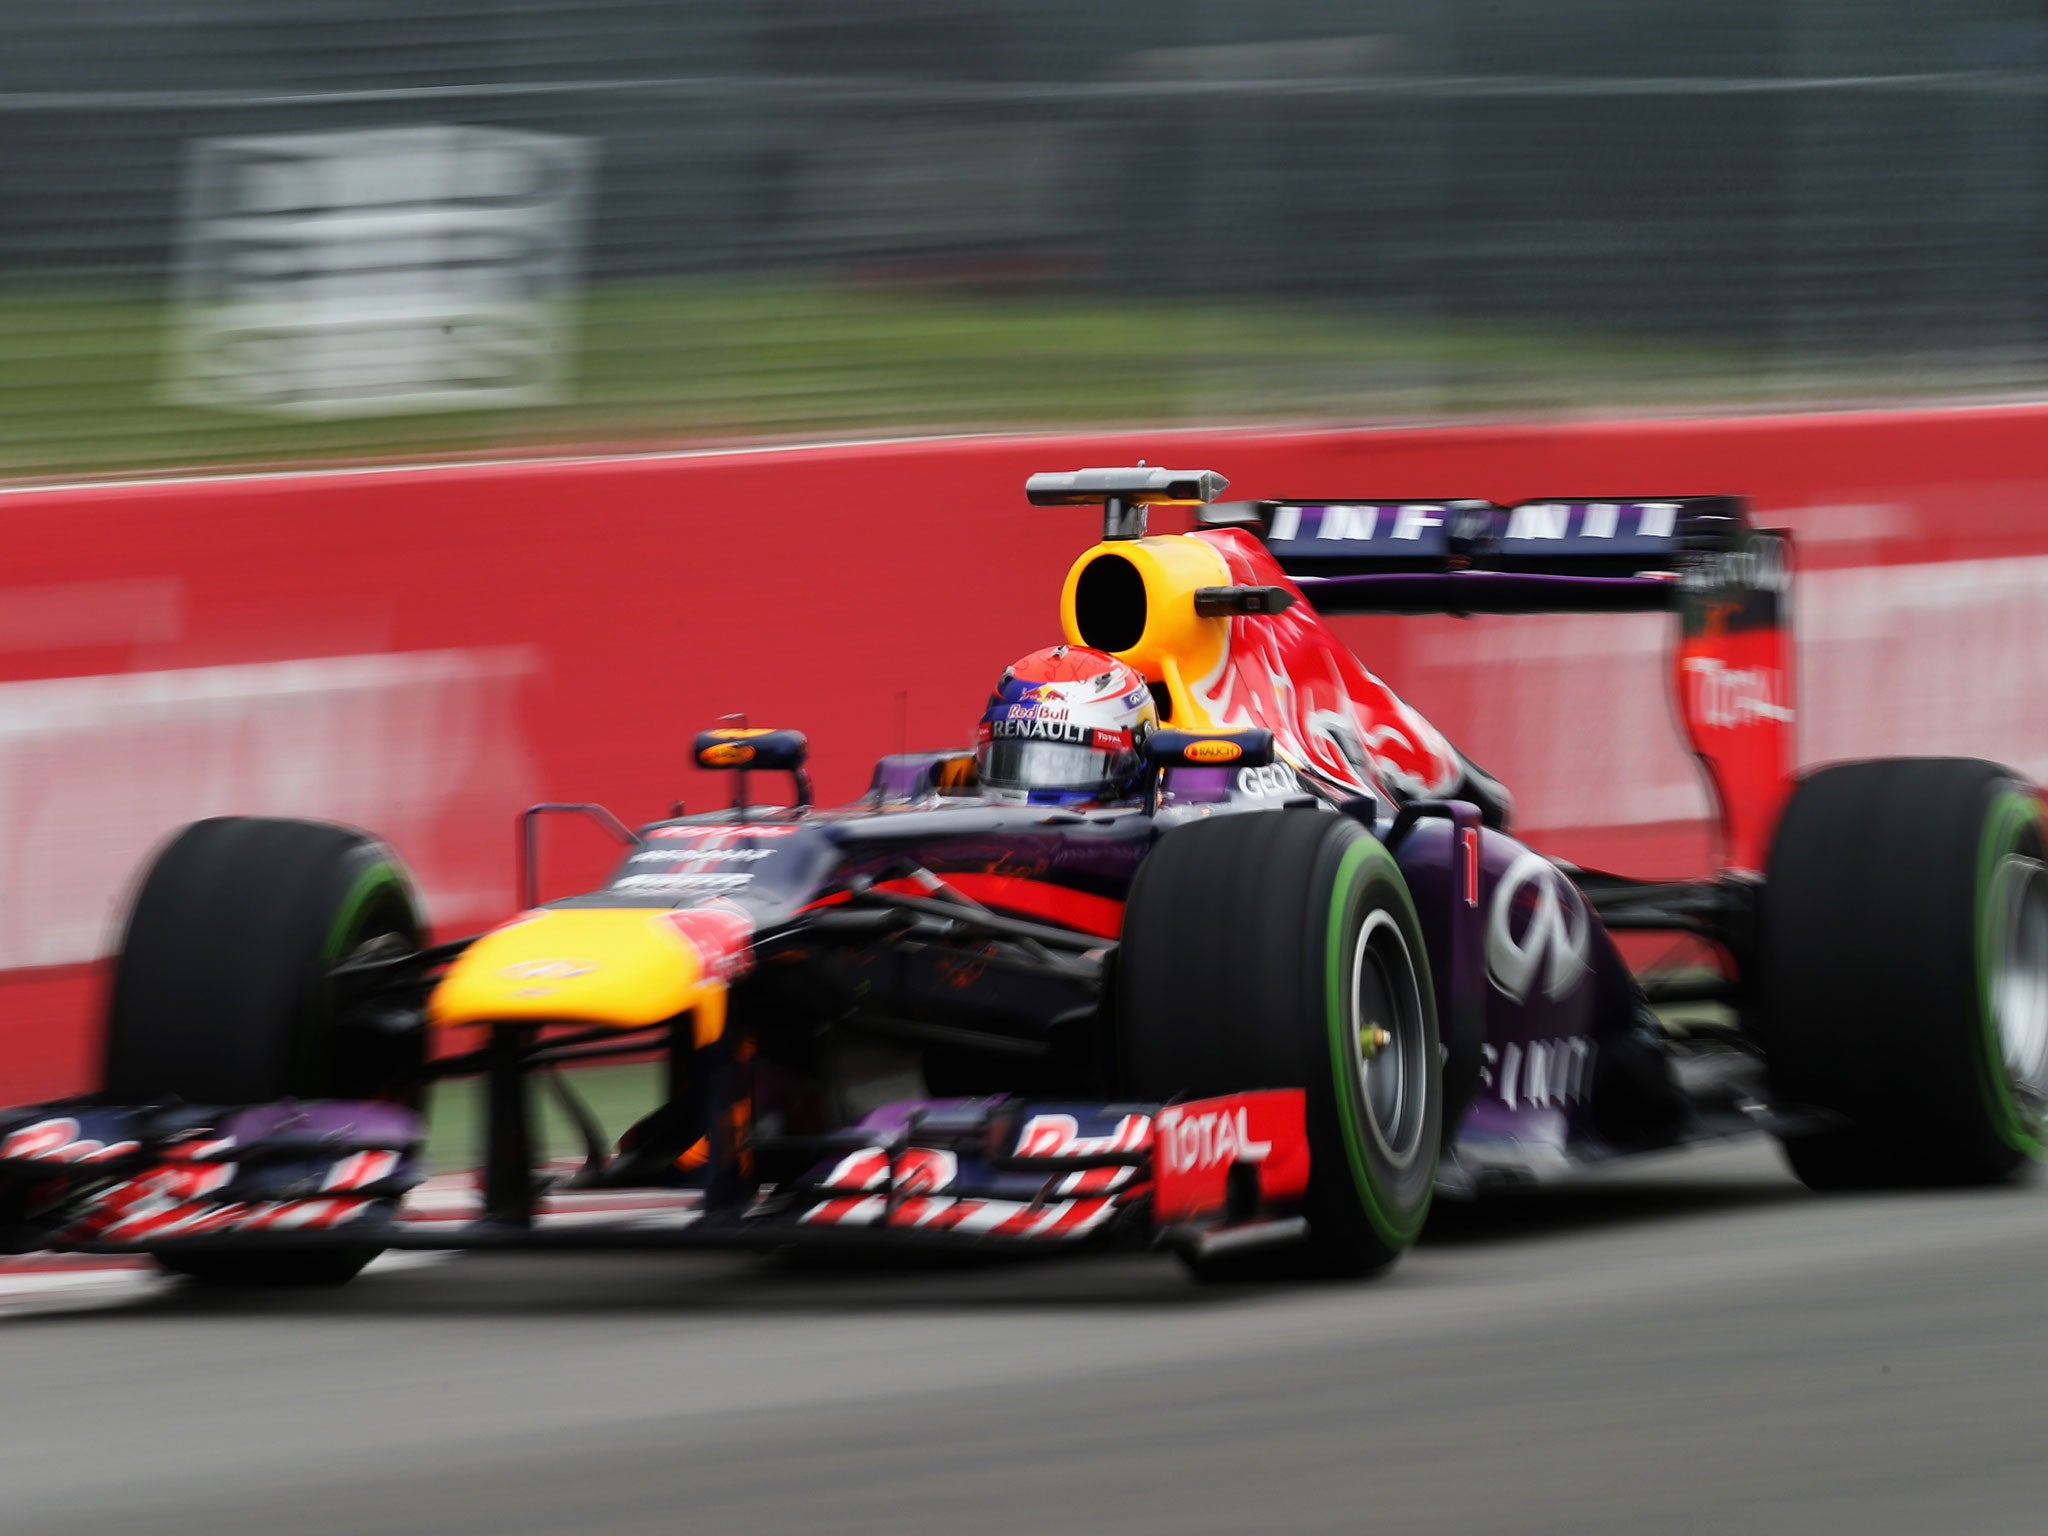 Sebastian Vettel put his Red Bull on pole position at the Canadian Grand Prix